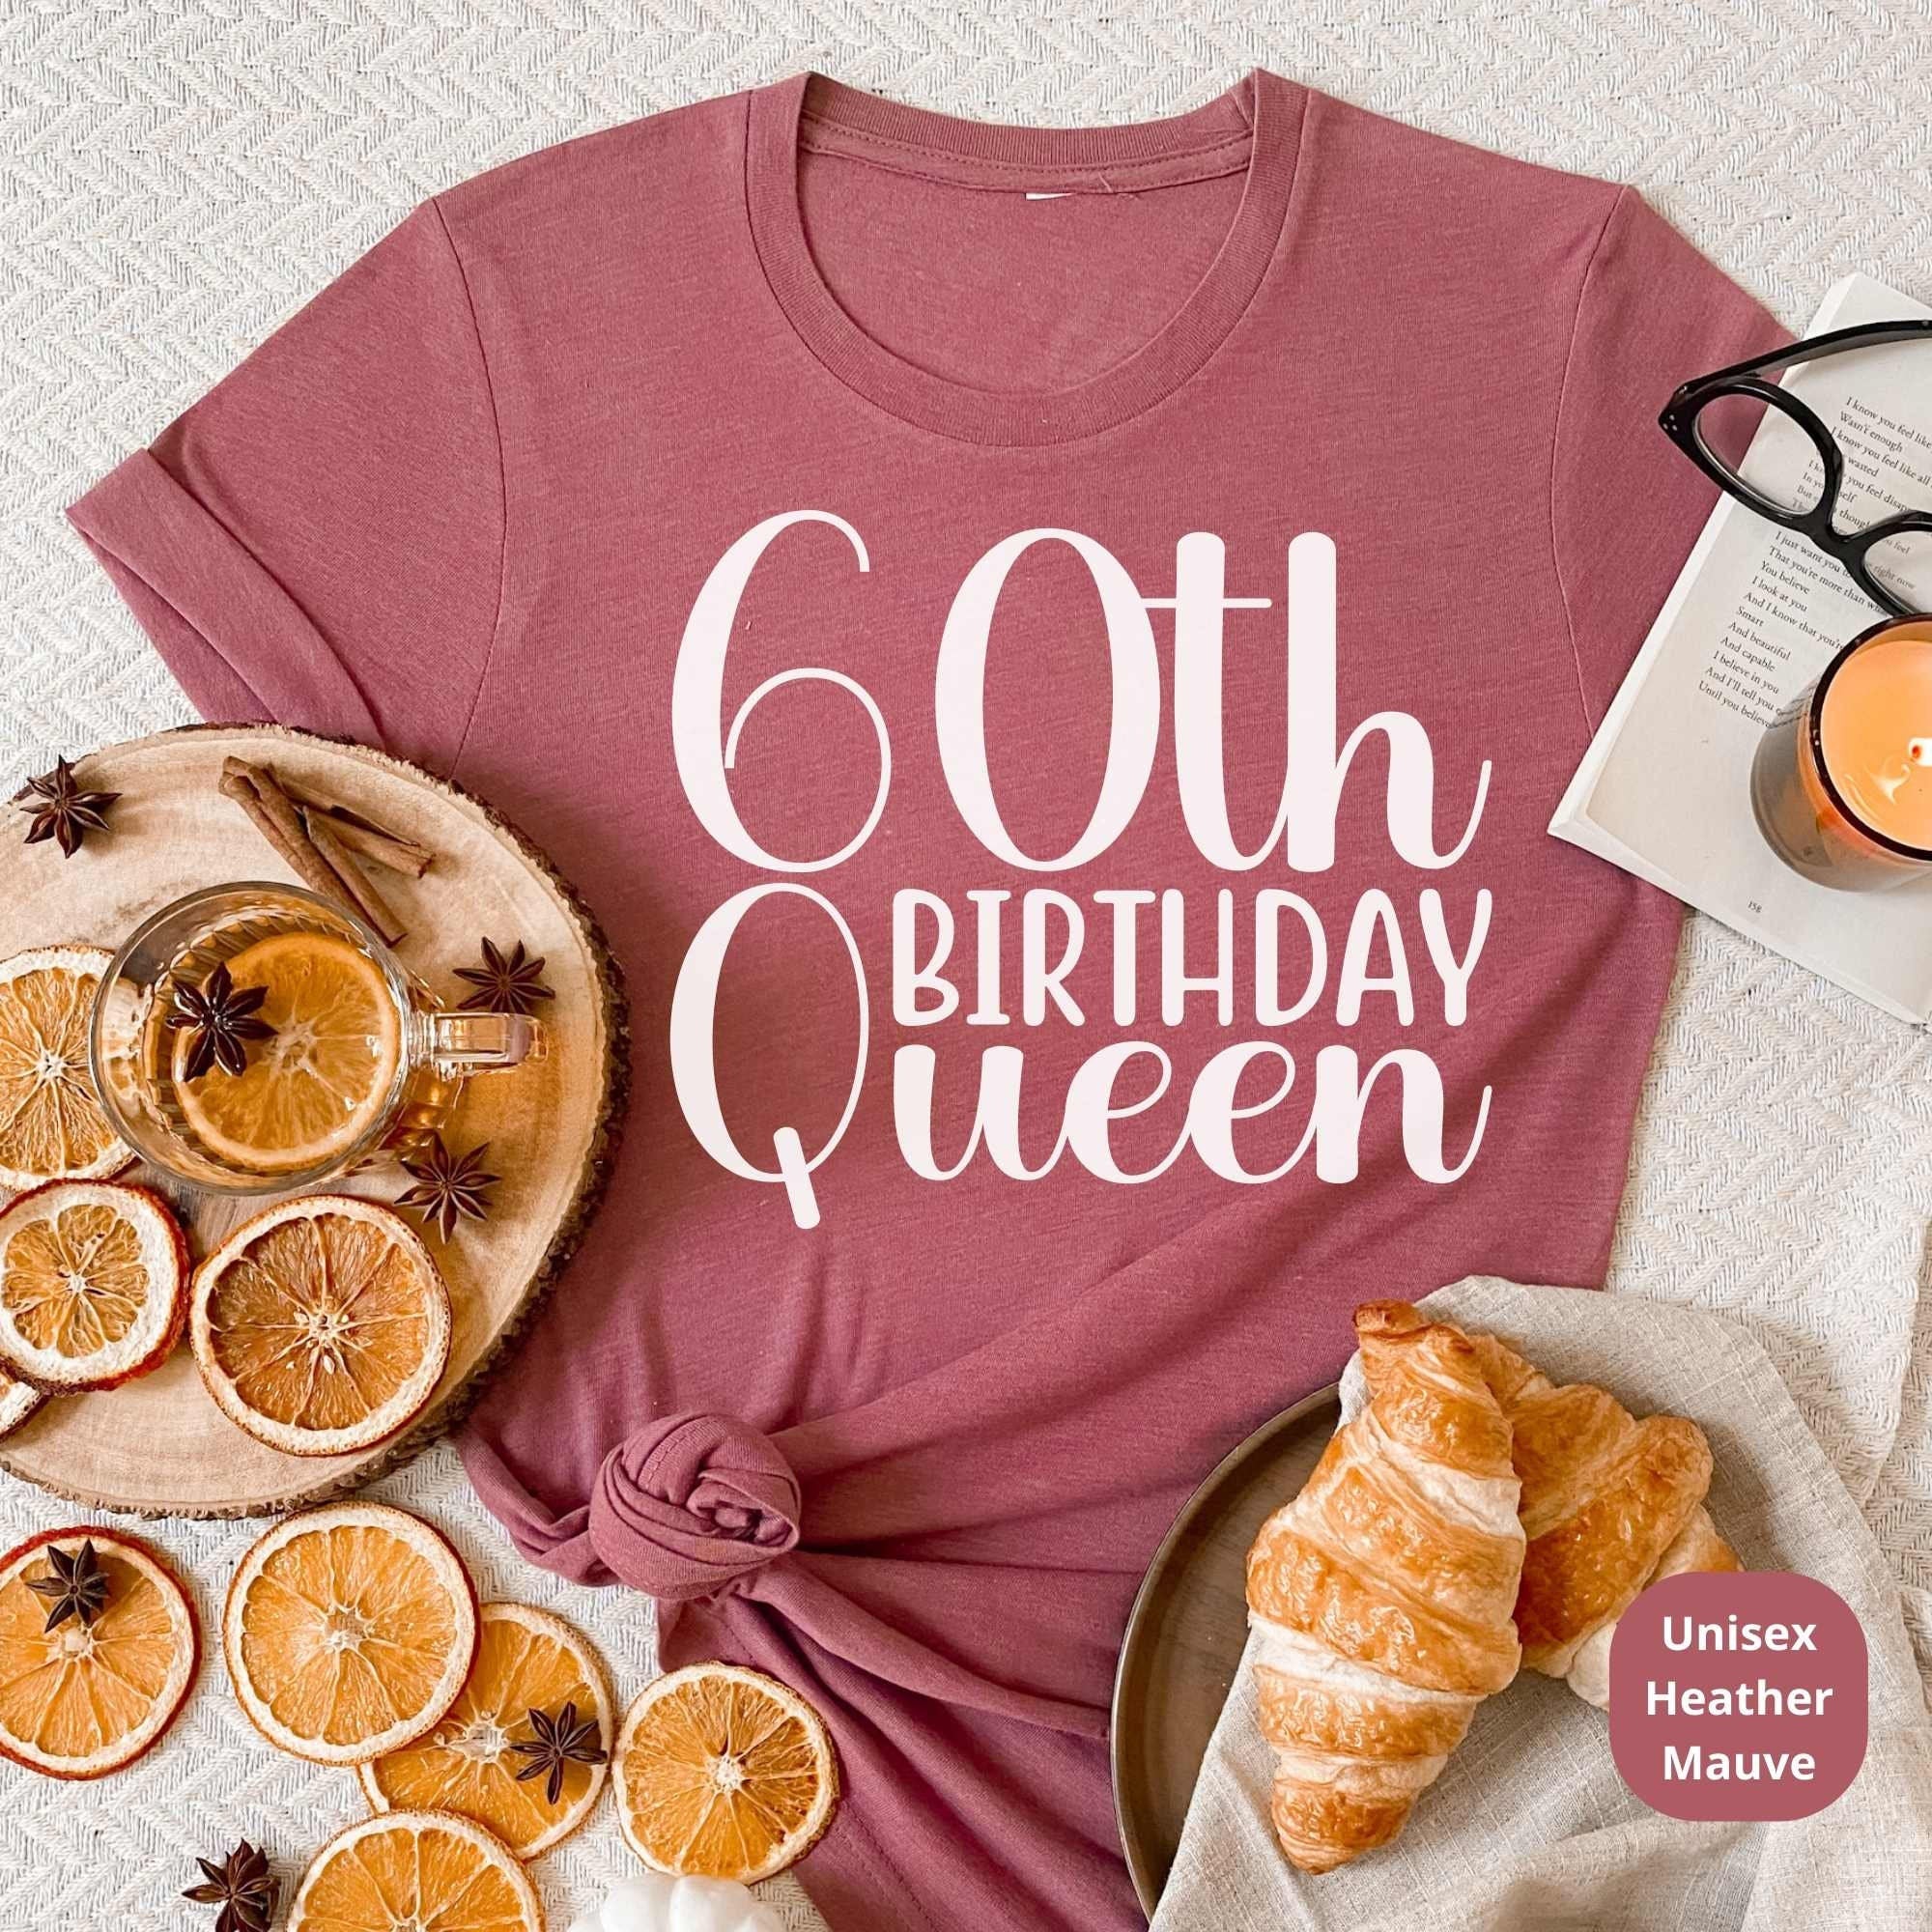 Funny 60th Birthday Gifts for Women, Men - Best 60th Bday Gift Ideas -  Happy 60 Year Old Birthday Gifts for Friends, Wife, Mom, Dad, Sister,  Husband, Grandpa, Grandma - Lavender Candles : Amazon.in